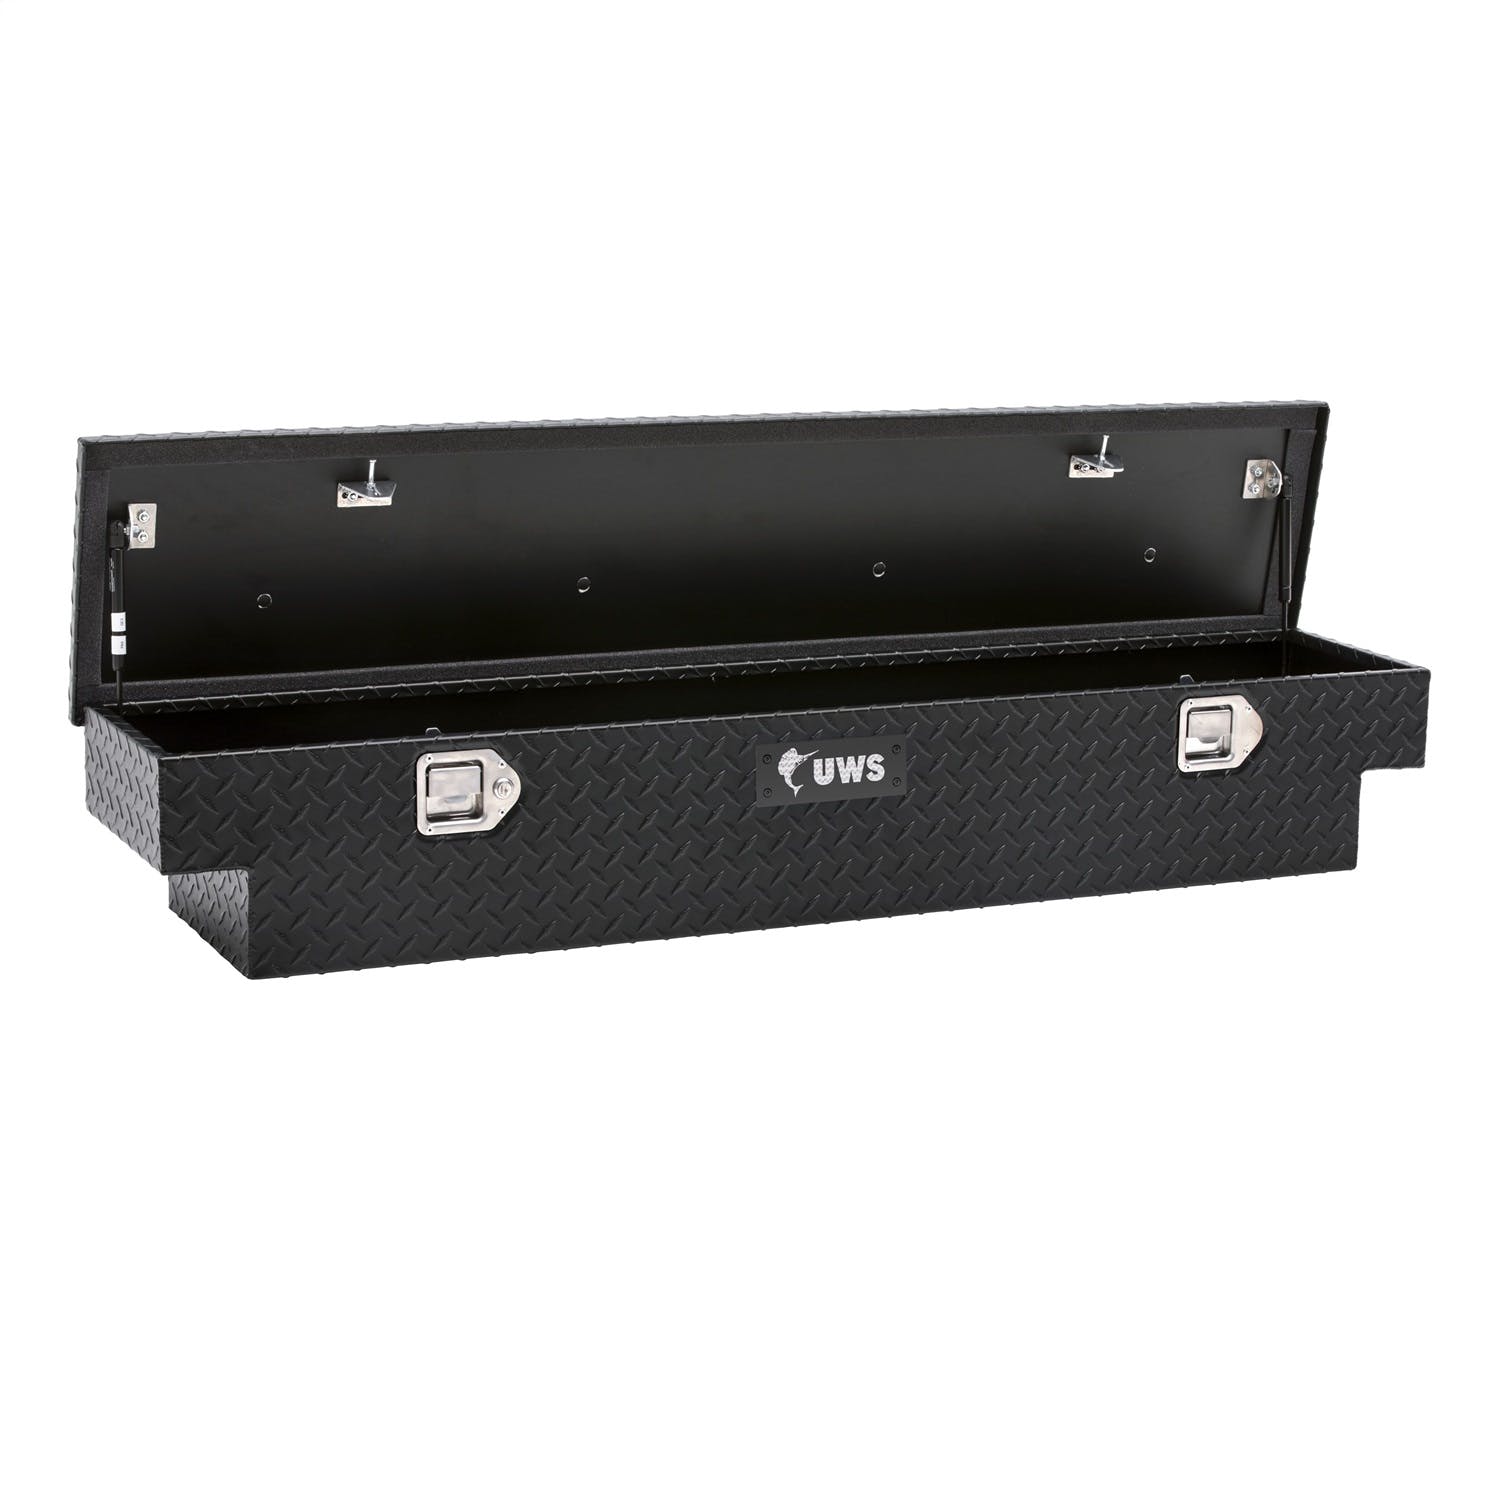 UWS EC10903 UTV Crossover Tool Box  Matte Black with Additional Packaging